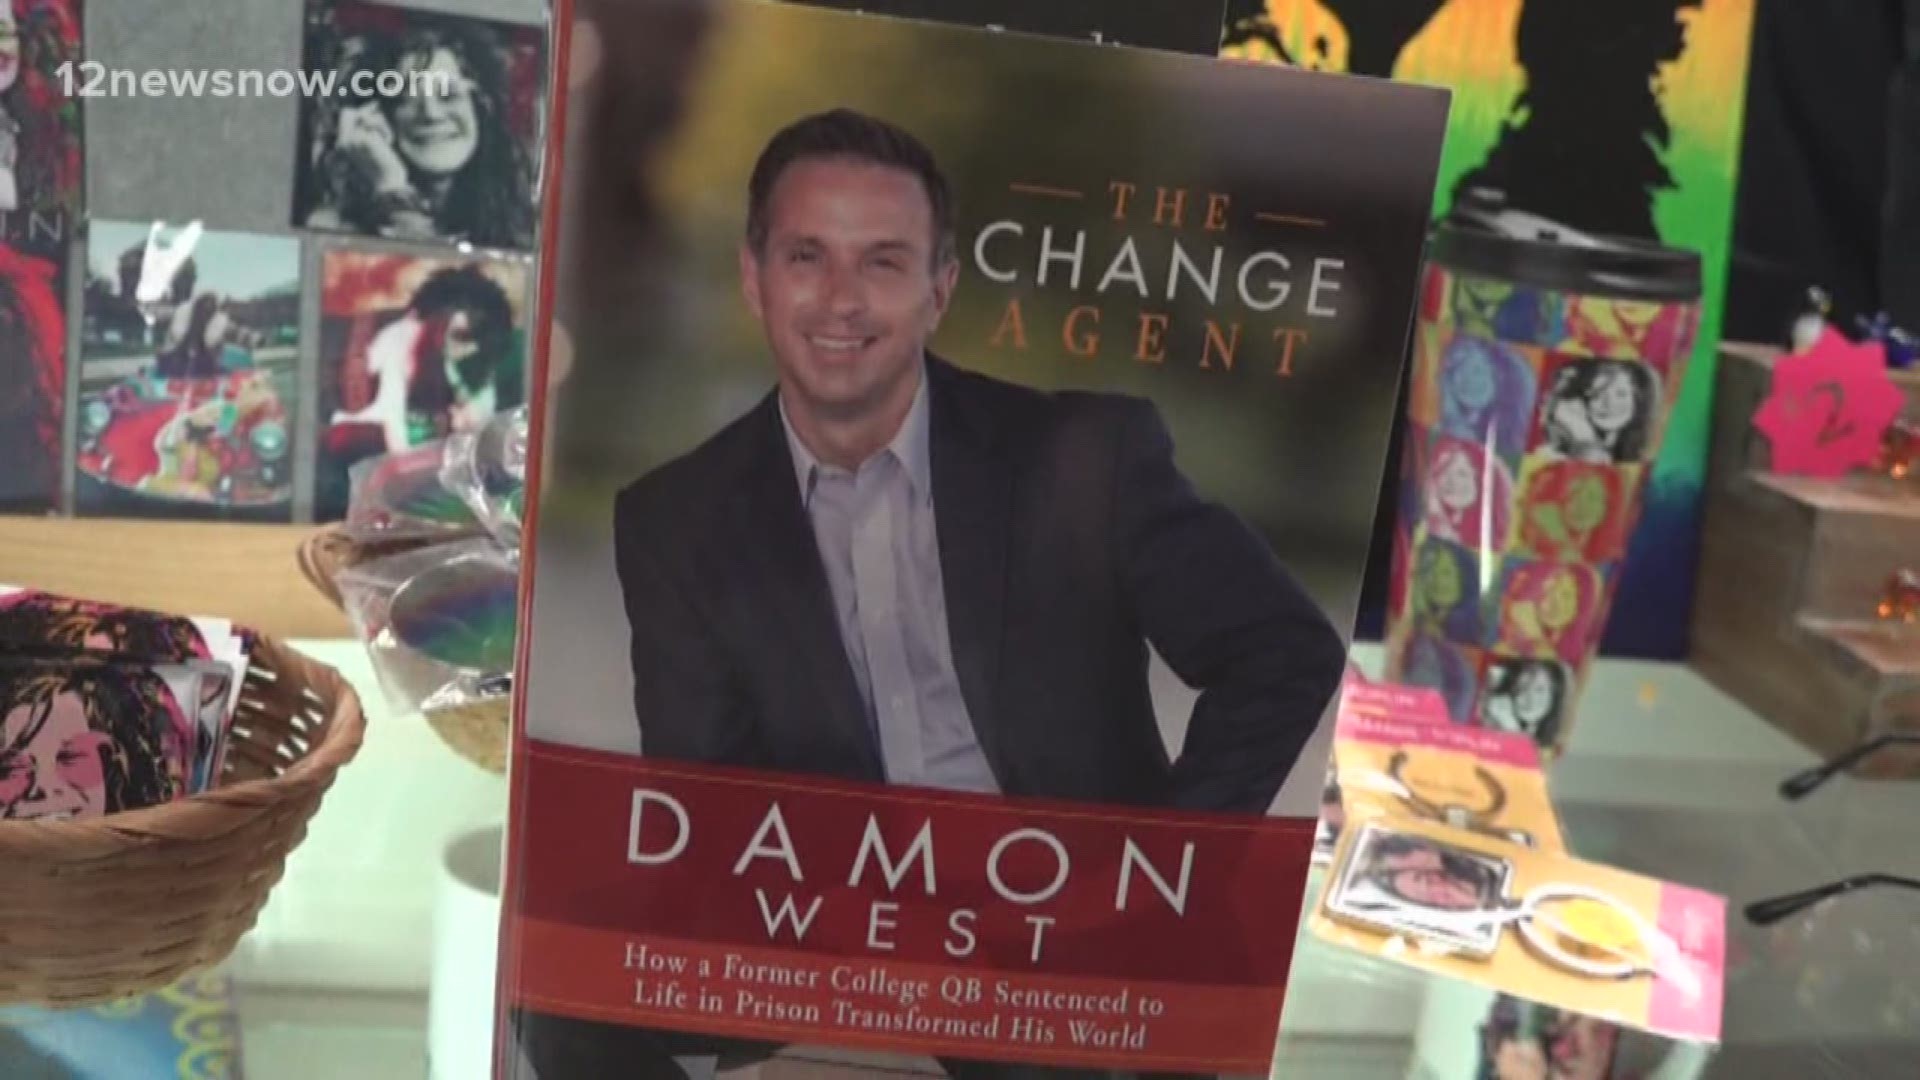 Damon West wrote of his redemption from being a criminal, to his prison recovery, to inspiring others.